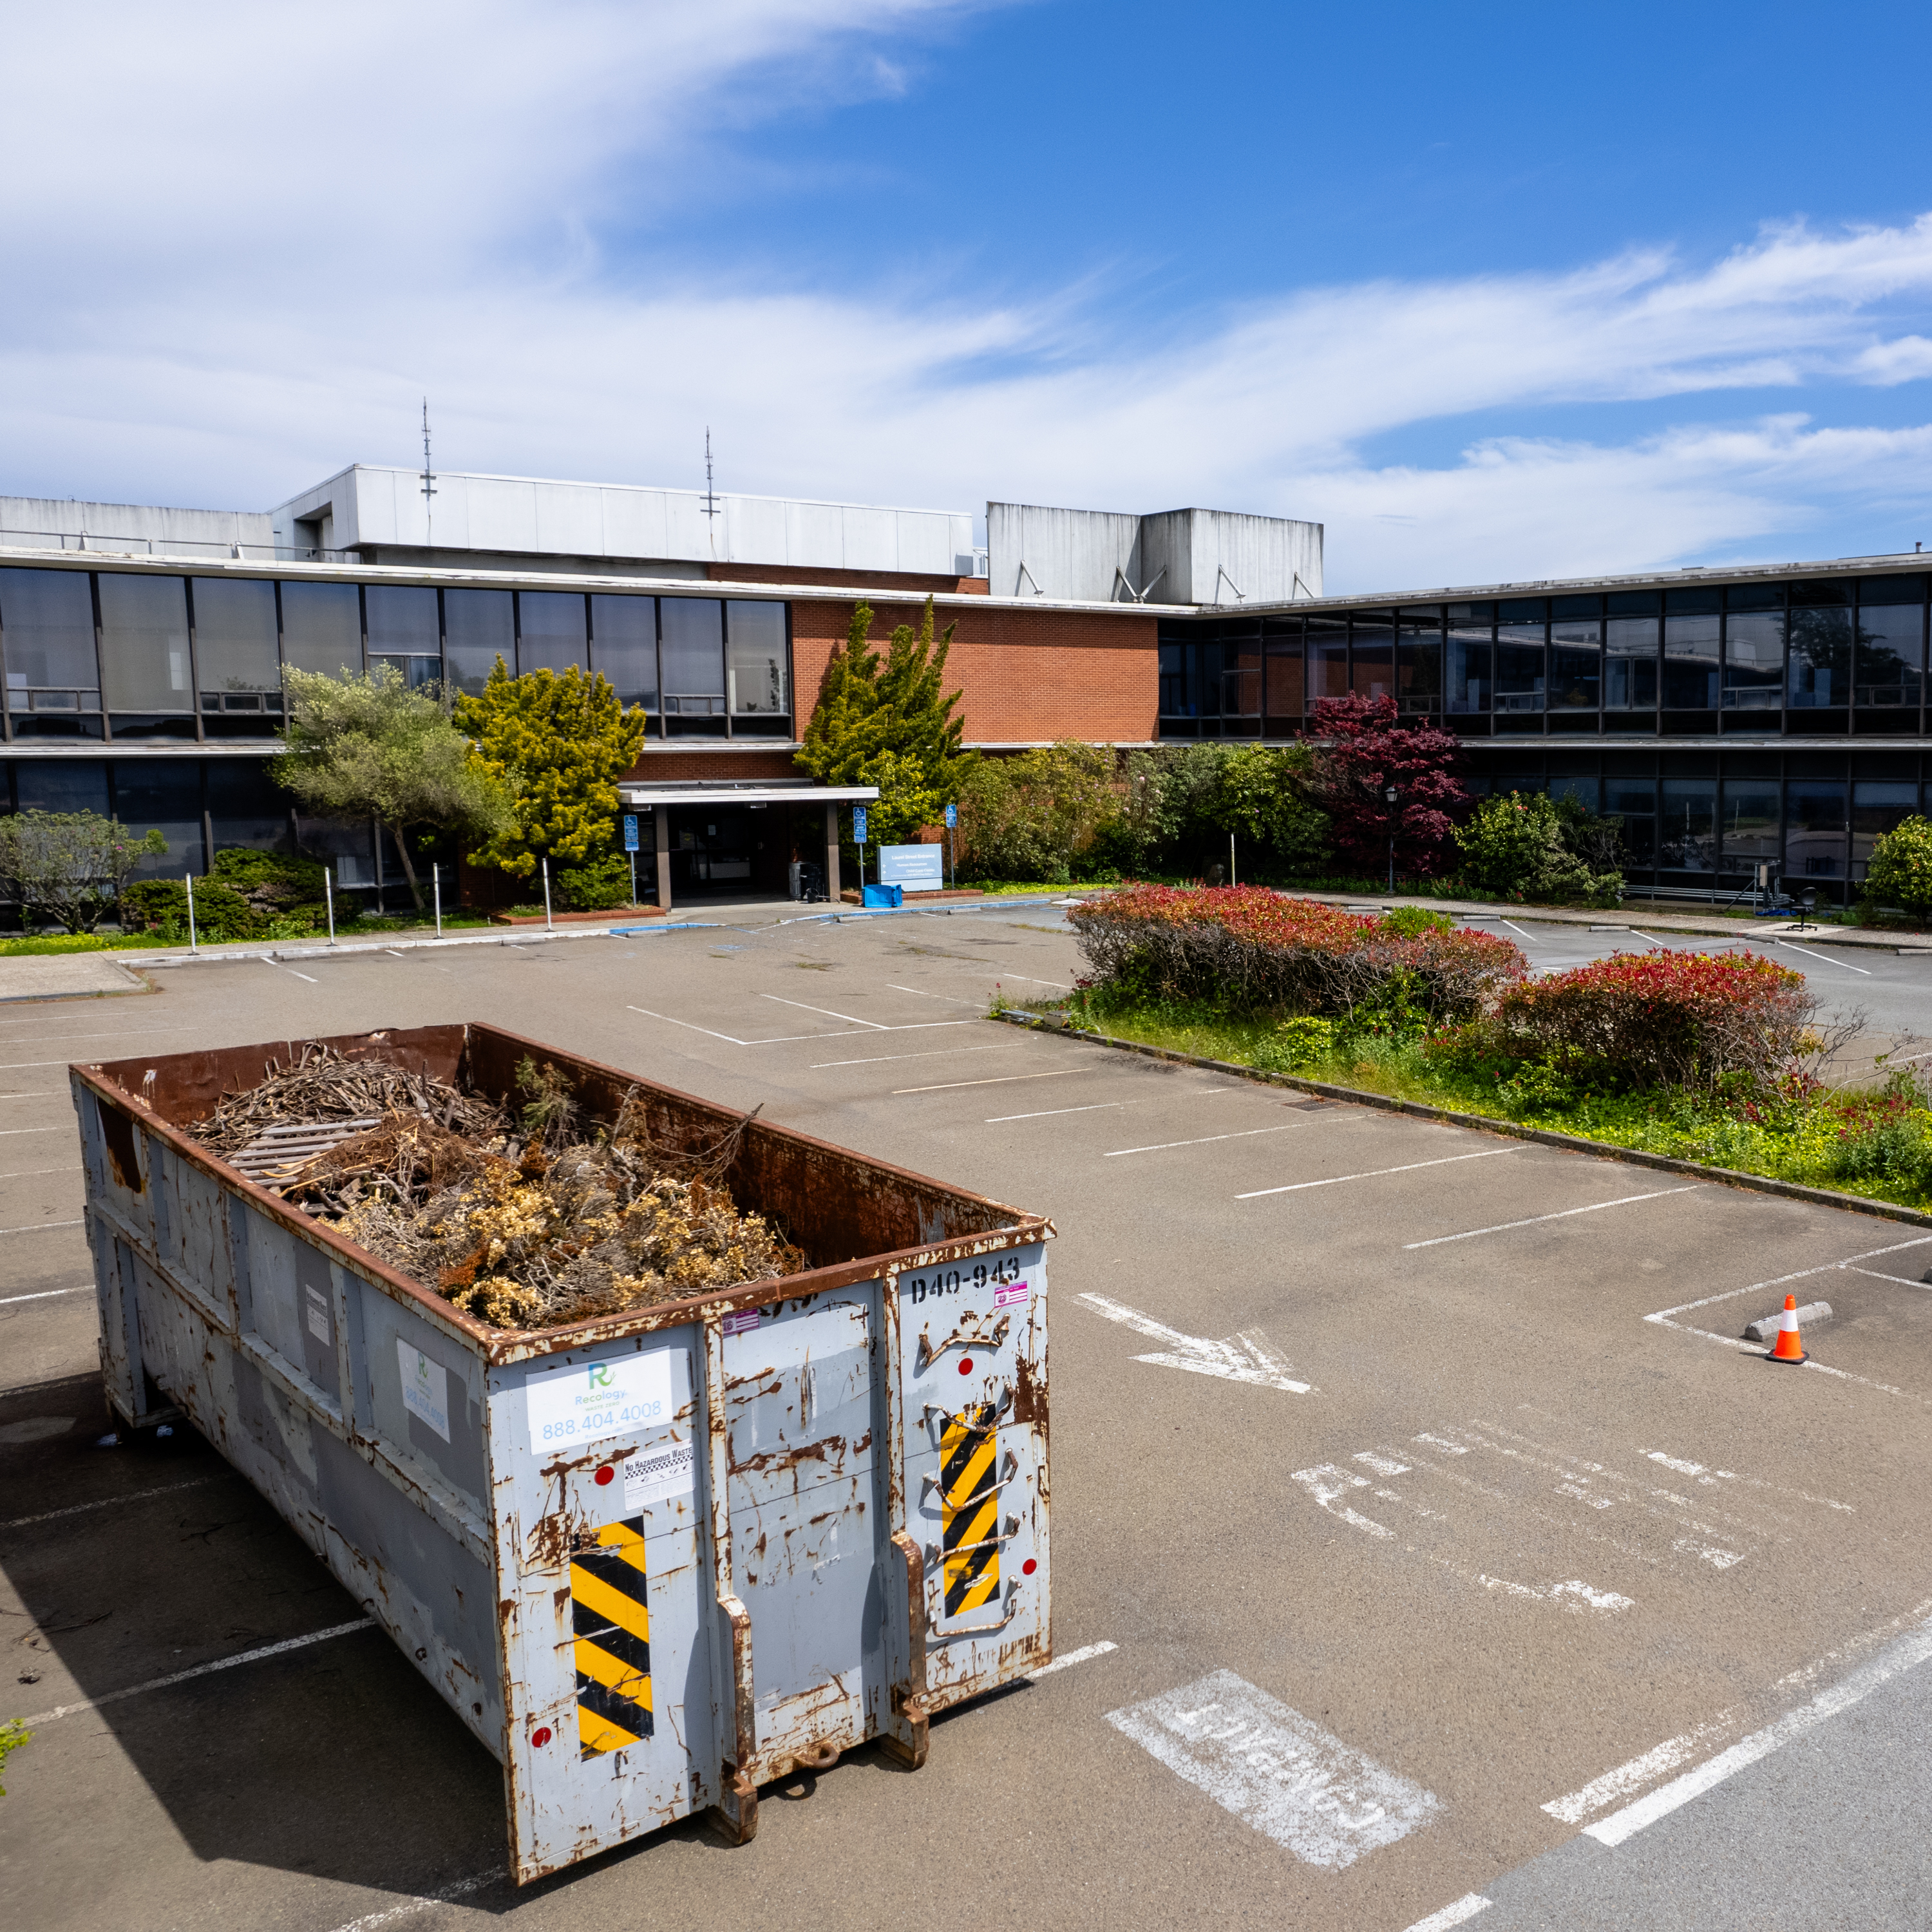 An overgrown parking lot with a rusty dumpster, surrounded by a deserted building under a clear sky.